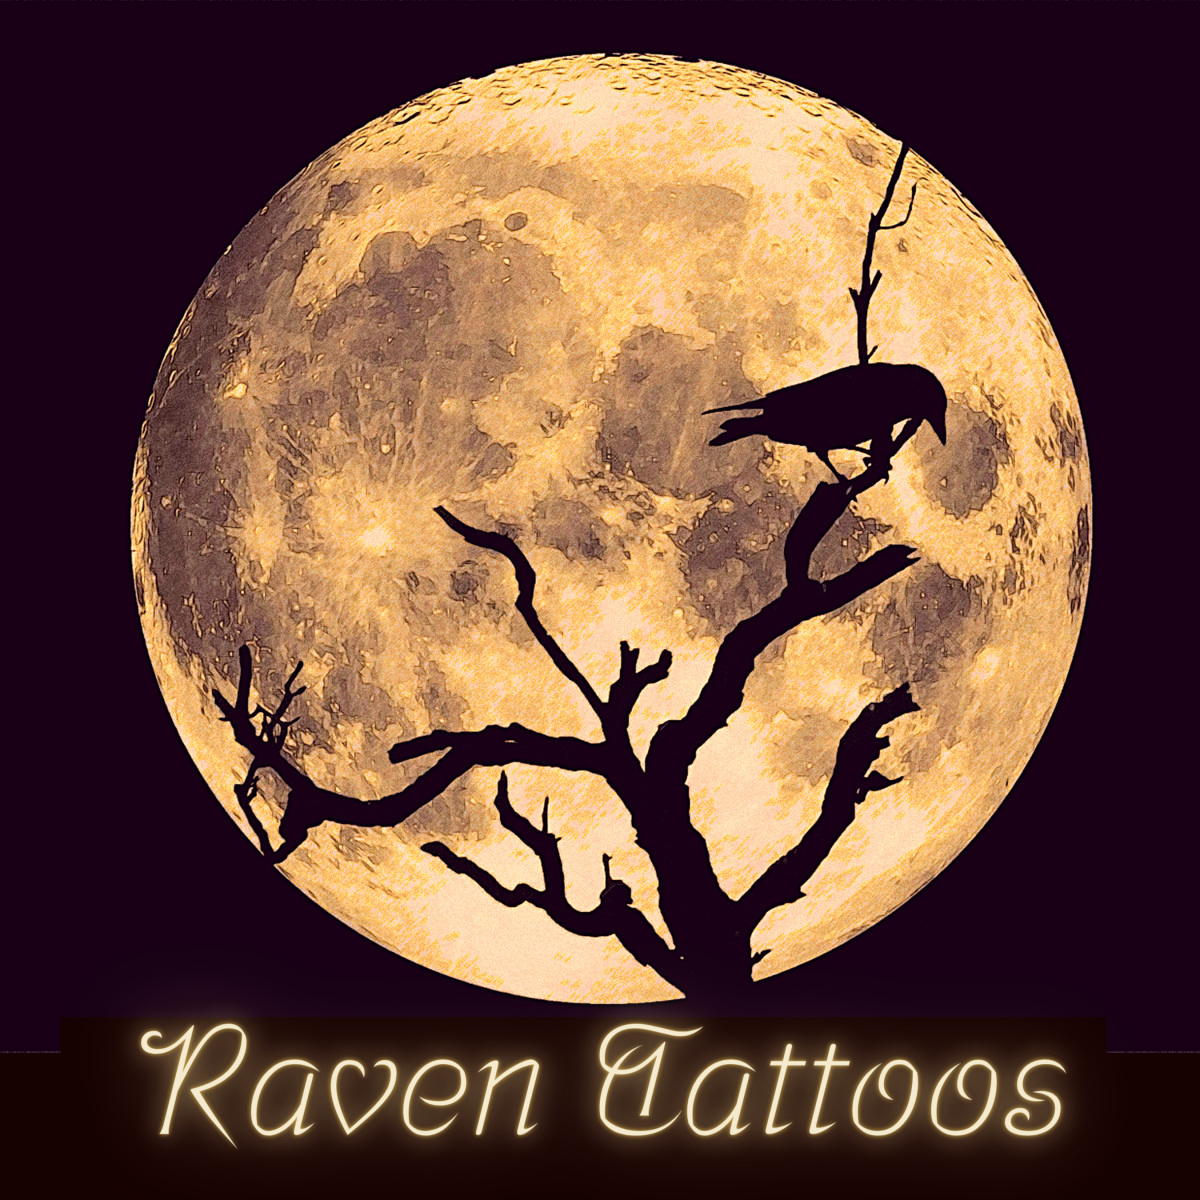 Raven Tattoo Meanings, Designs, and Ideas